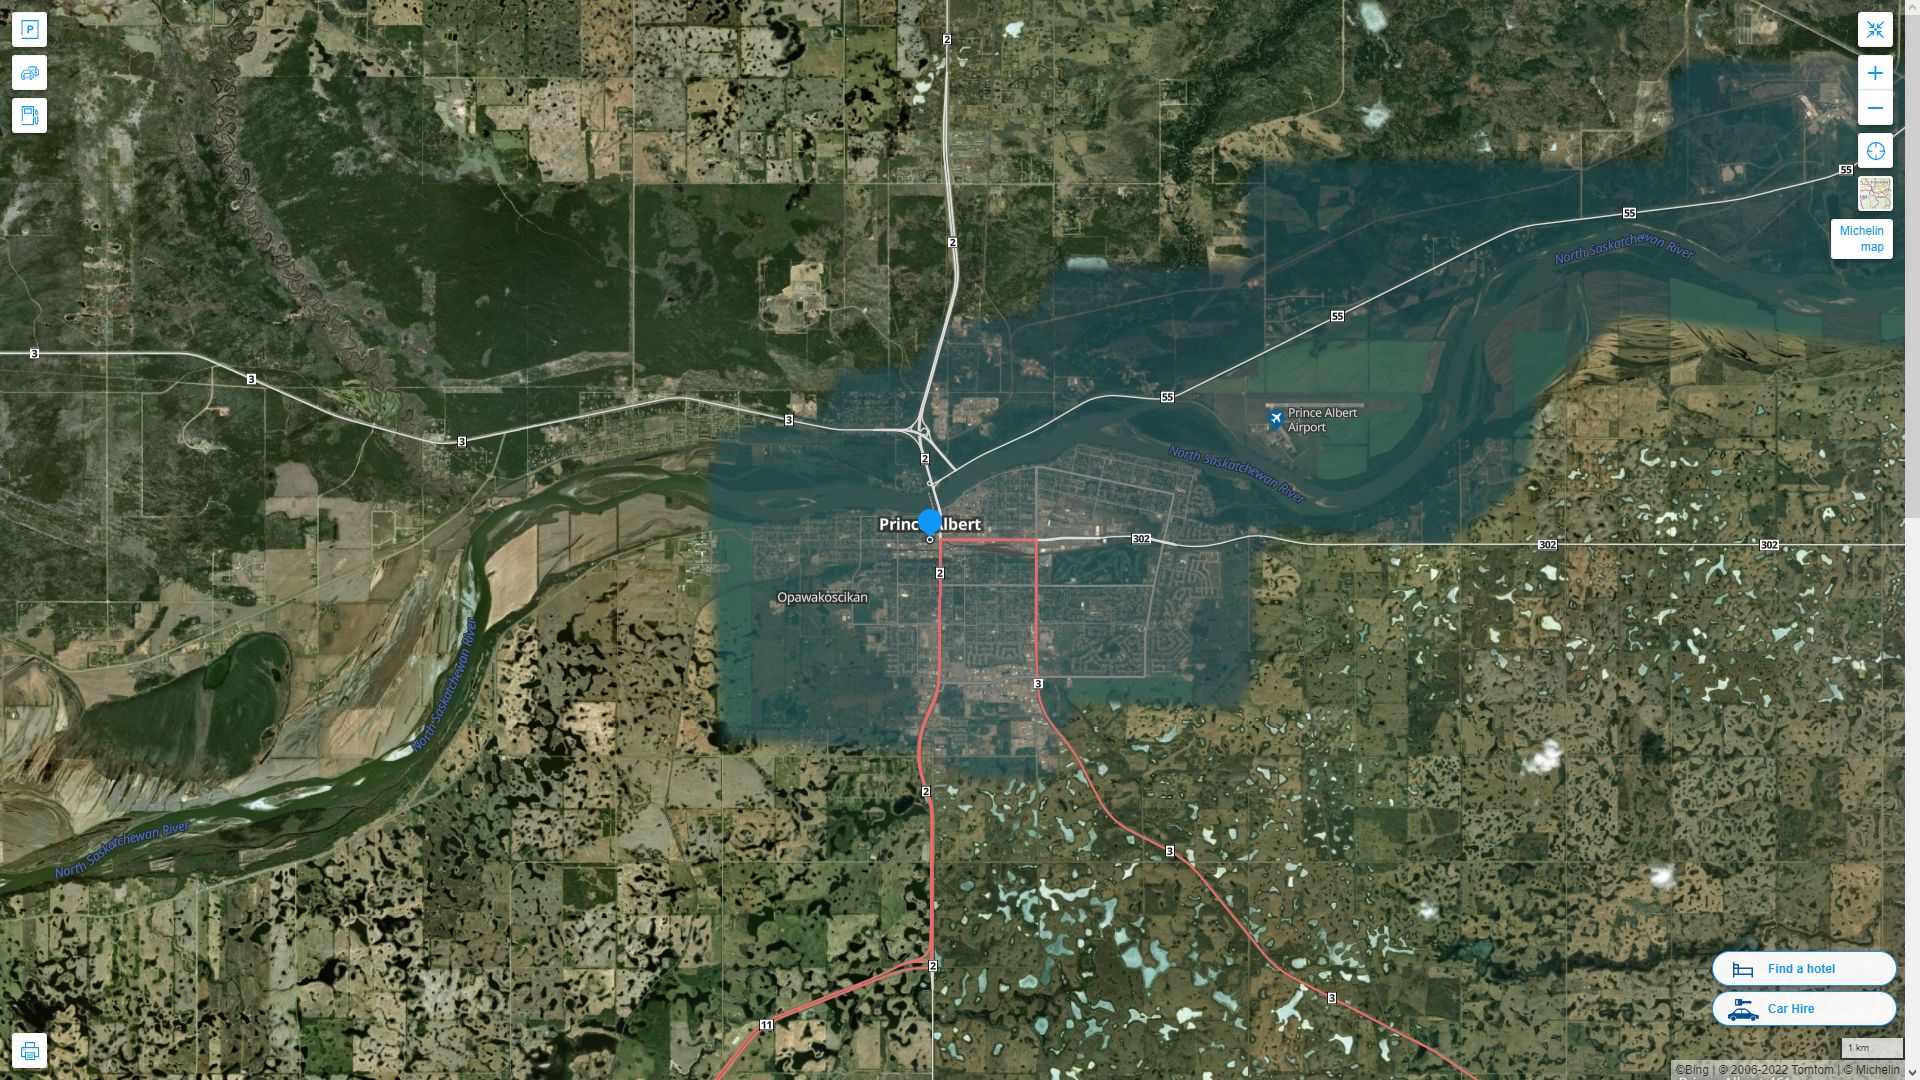 Prince Albert Highway and Road Map with Satellite View